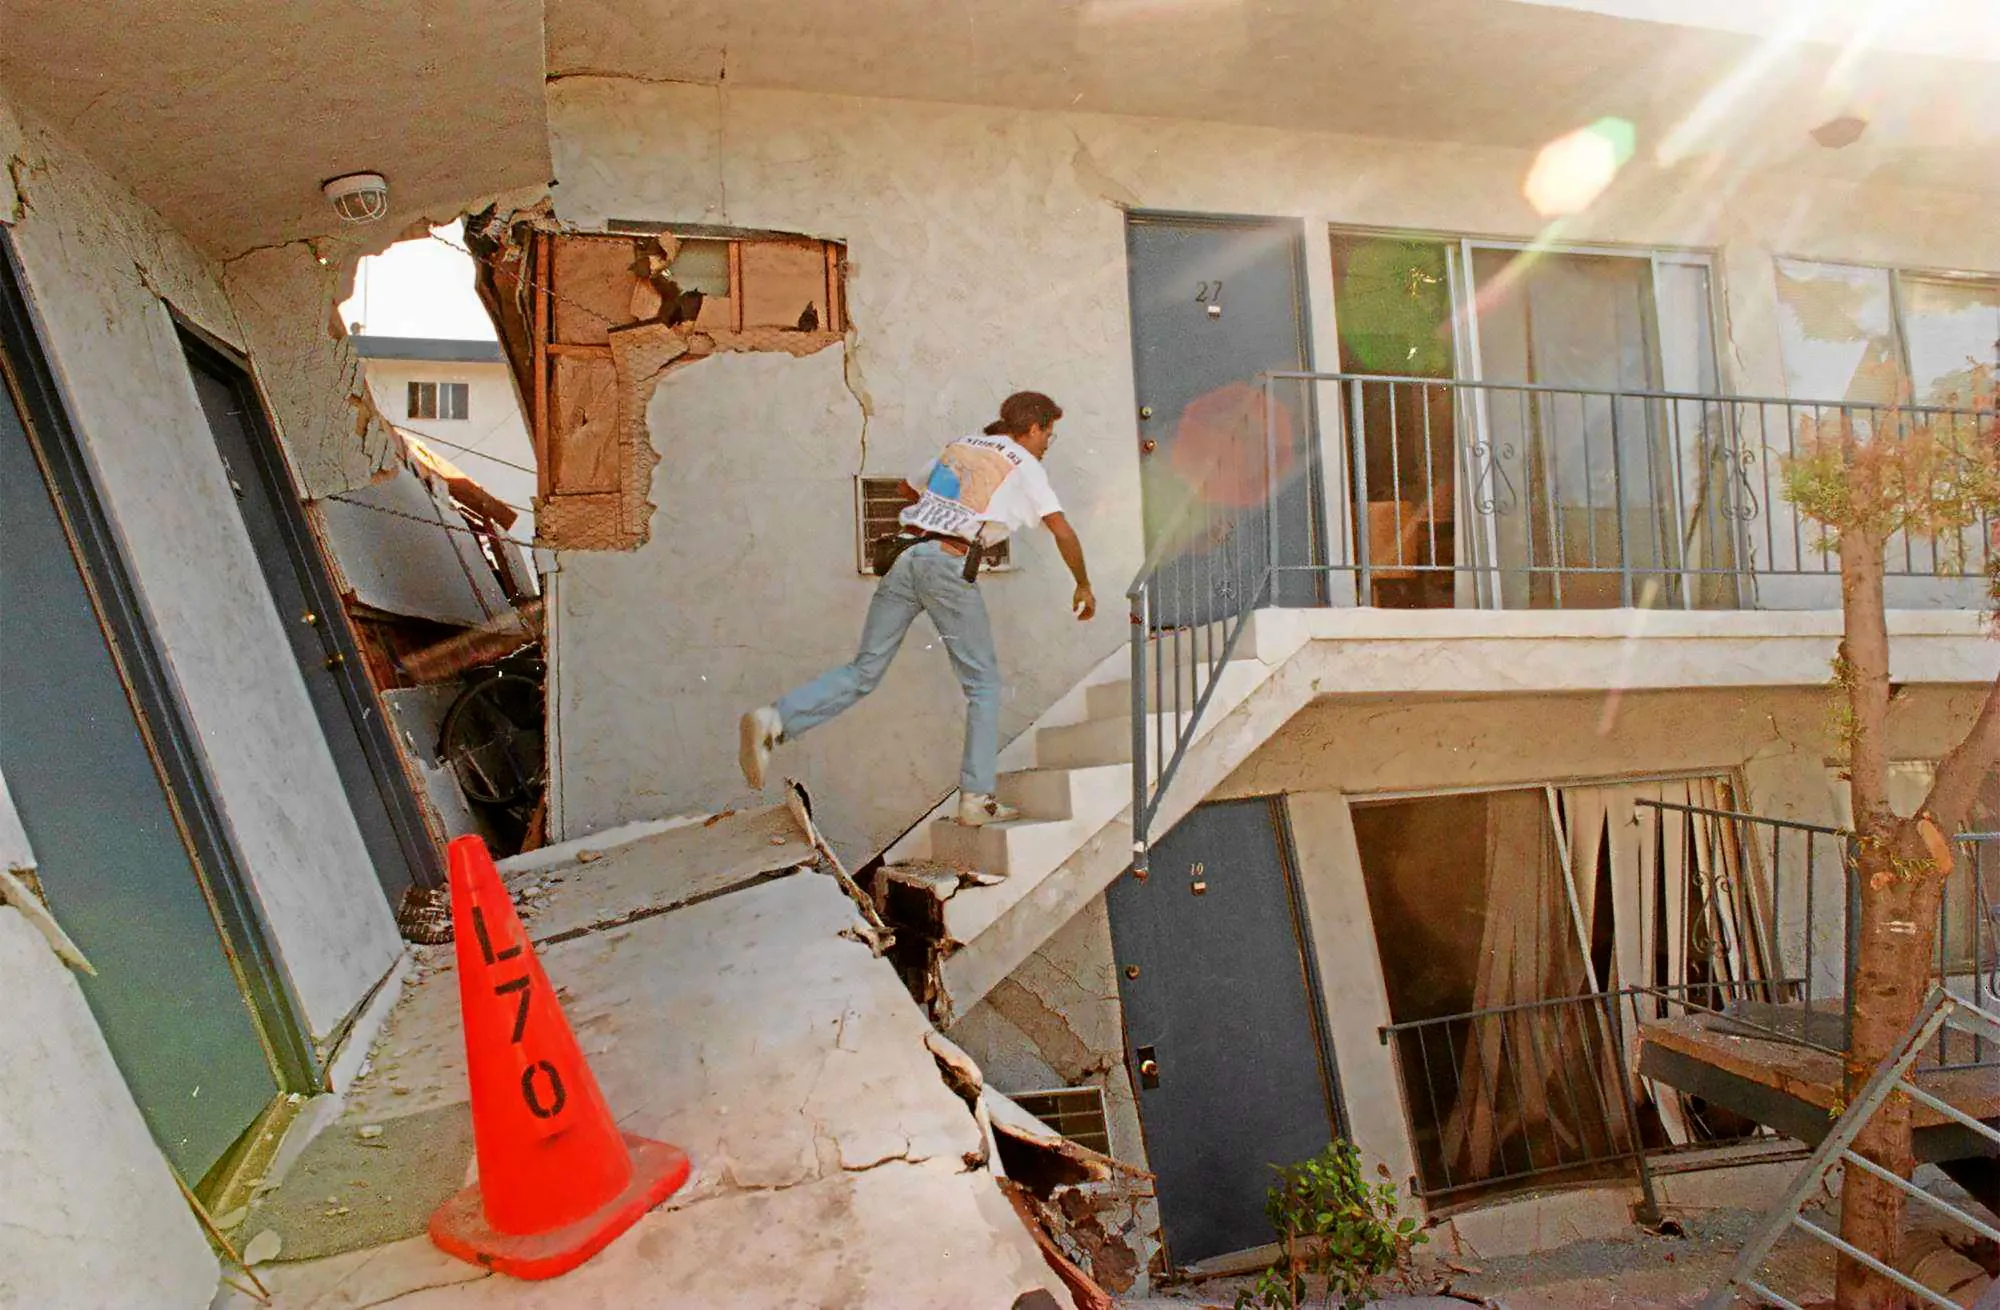 Northridge quake: It changed the way scientists government prep for